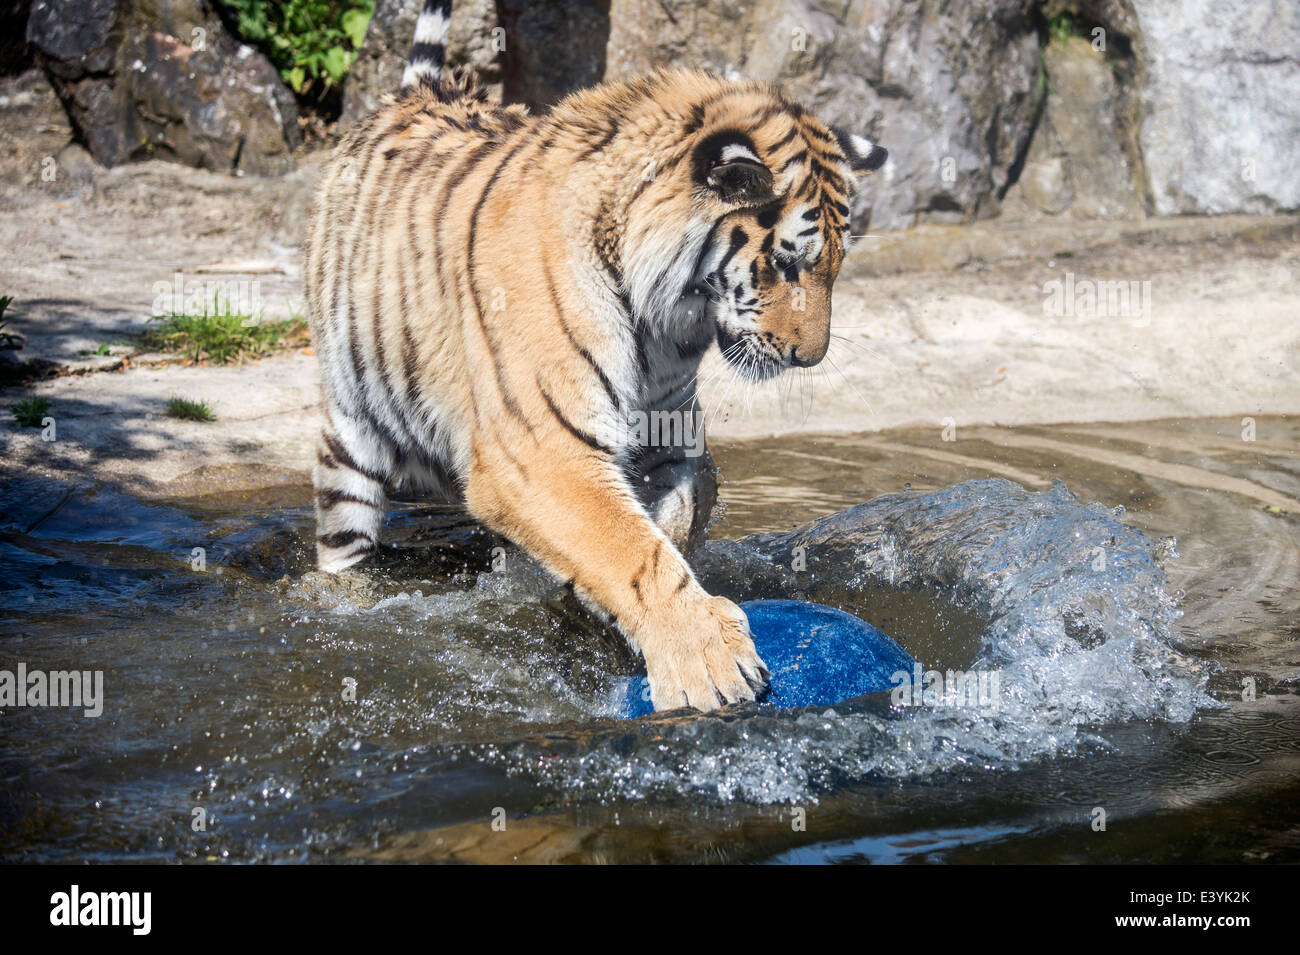 Male Amur tiger playing with a ball in water Stock Photo